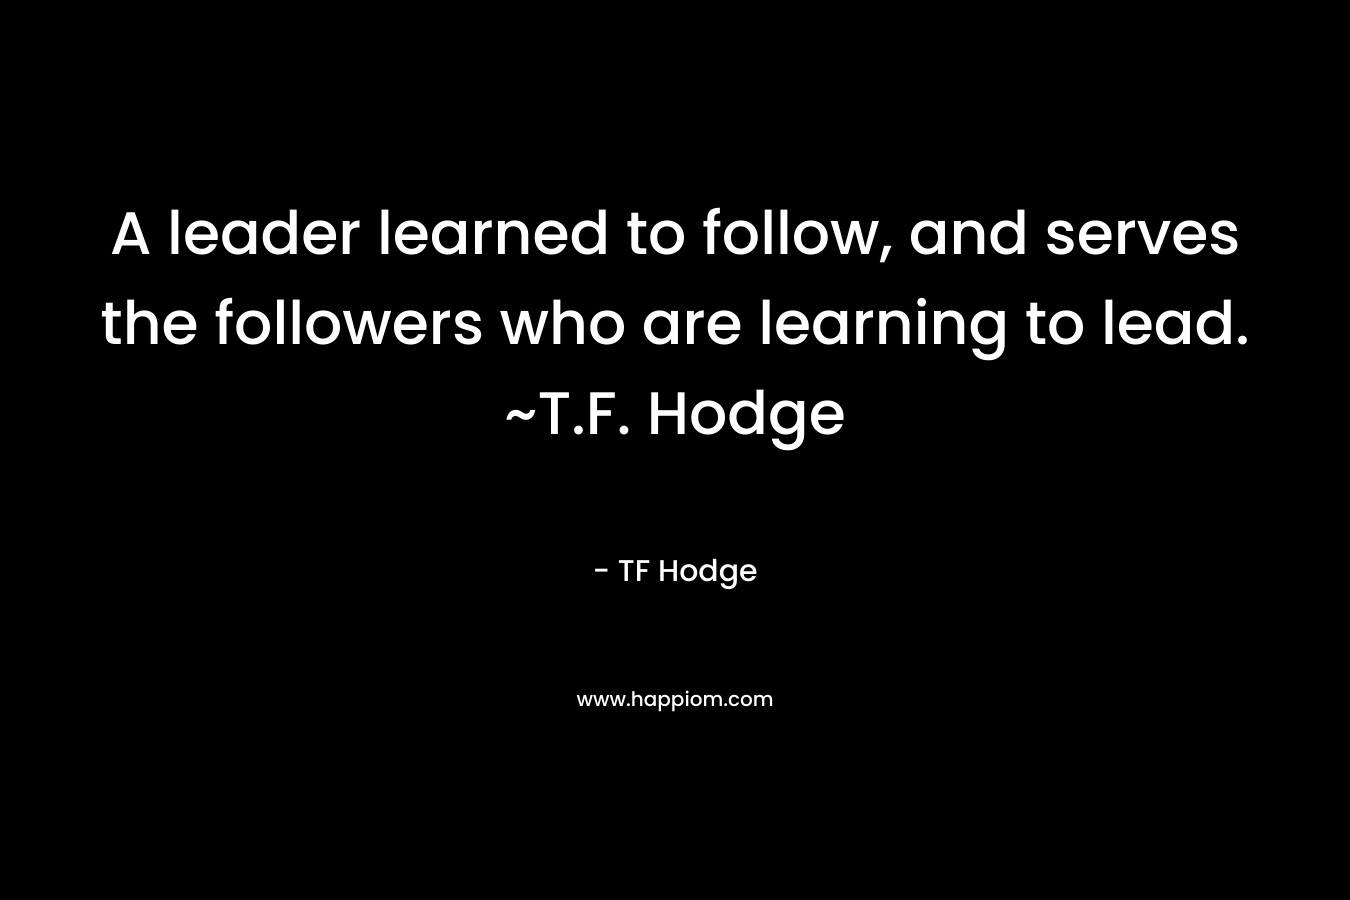 A leader learned to follow, and serves the followers who are learning to lead. ~T.F. Hodge